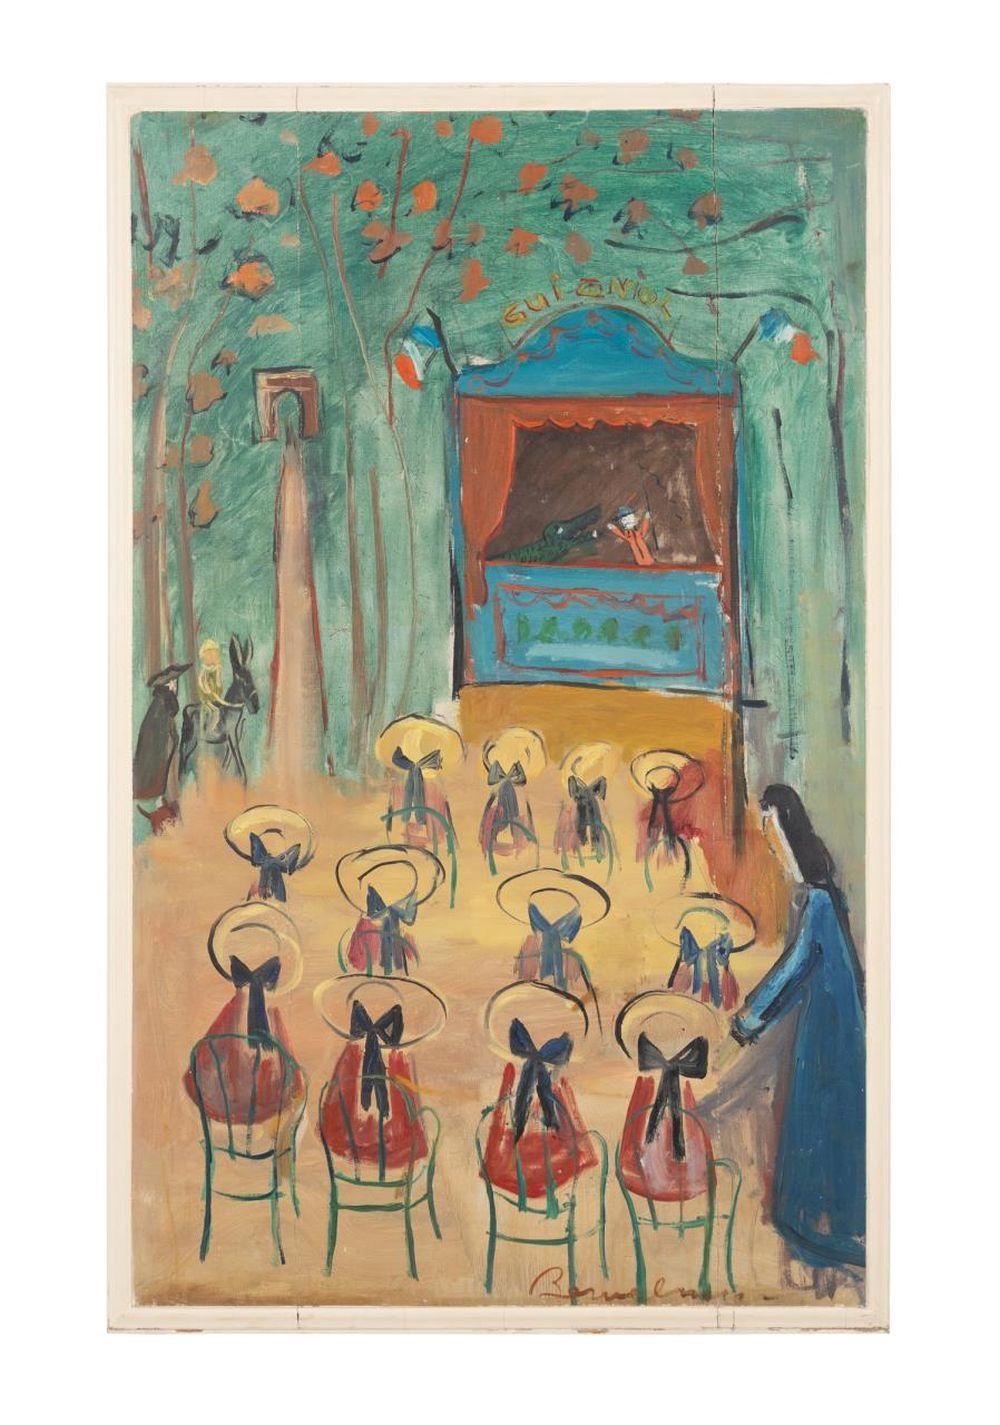 Oil on canvas laid to board by Ludwig Bemelmans (Austrian-American, 1898-1962), titled Puppet Show. It was one of three Belemans in the auction, all of which bested high estimates ($57,500).